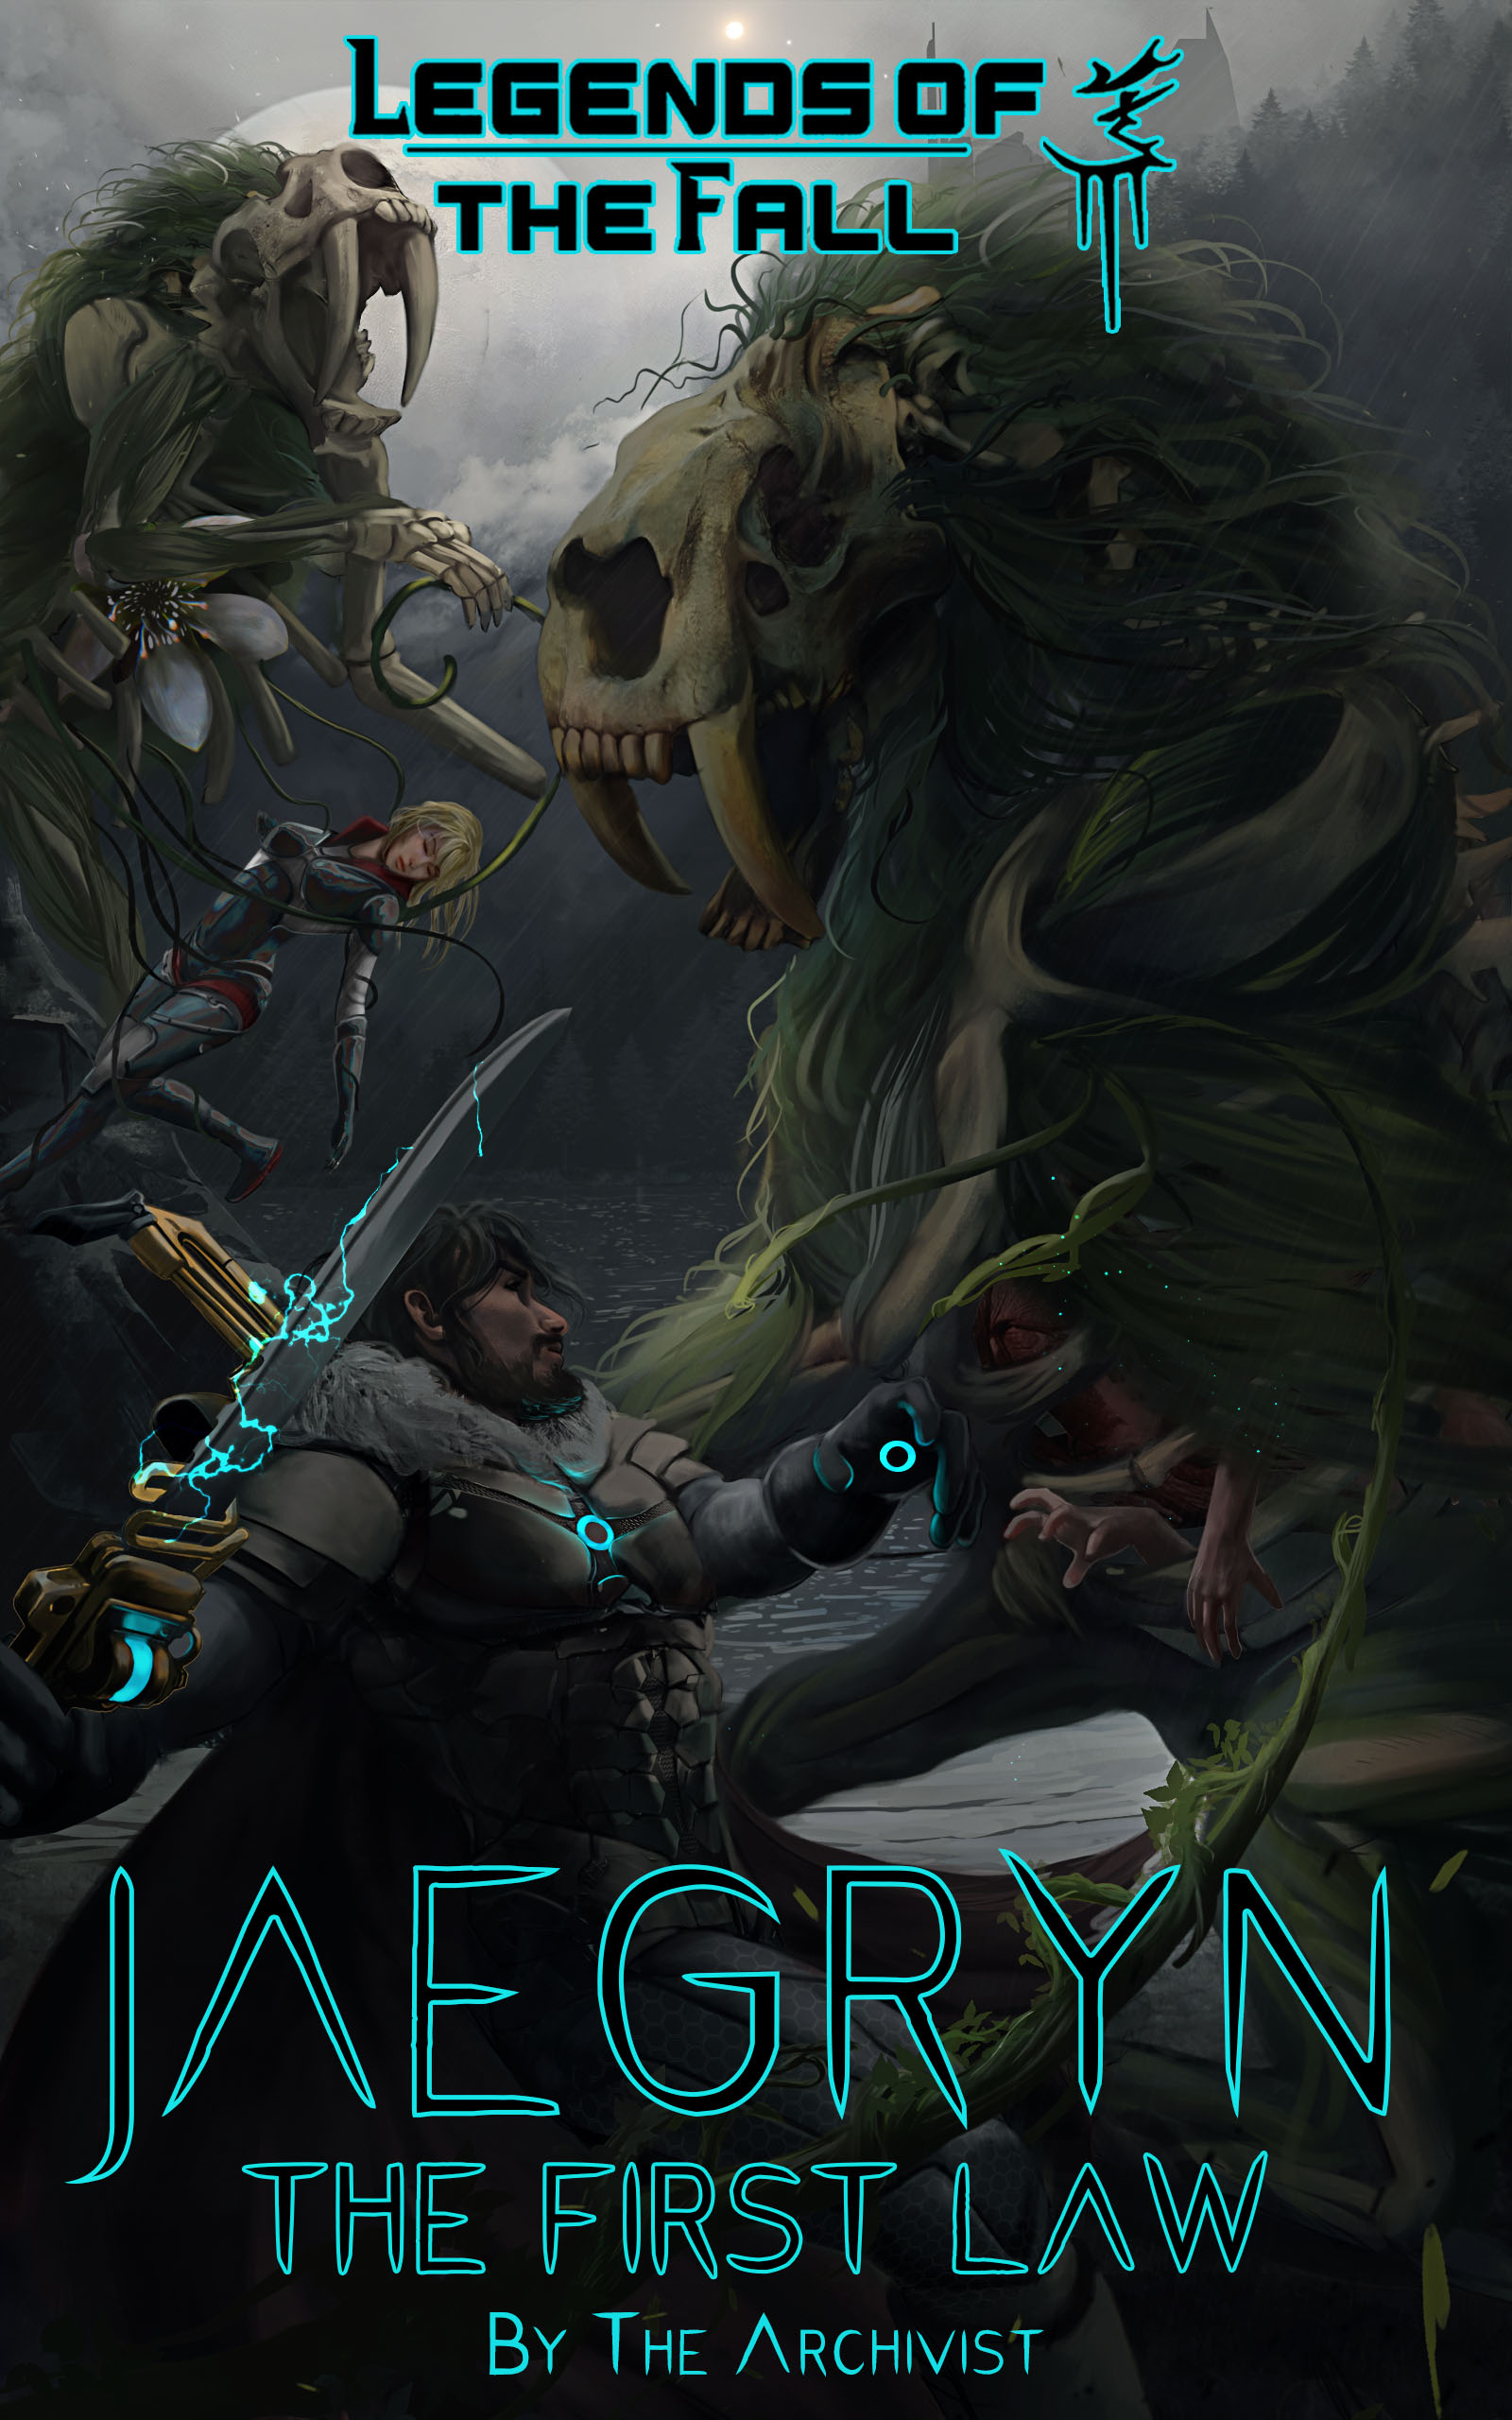 FREE: Jaegryn: The First Law by The Archivist